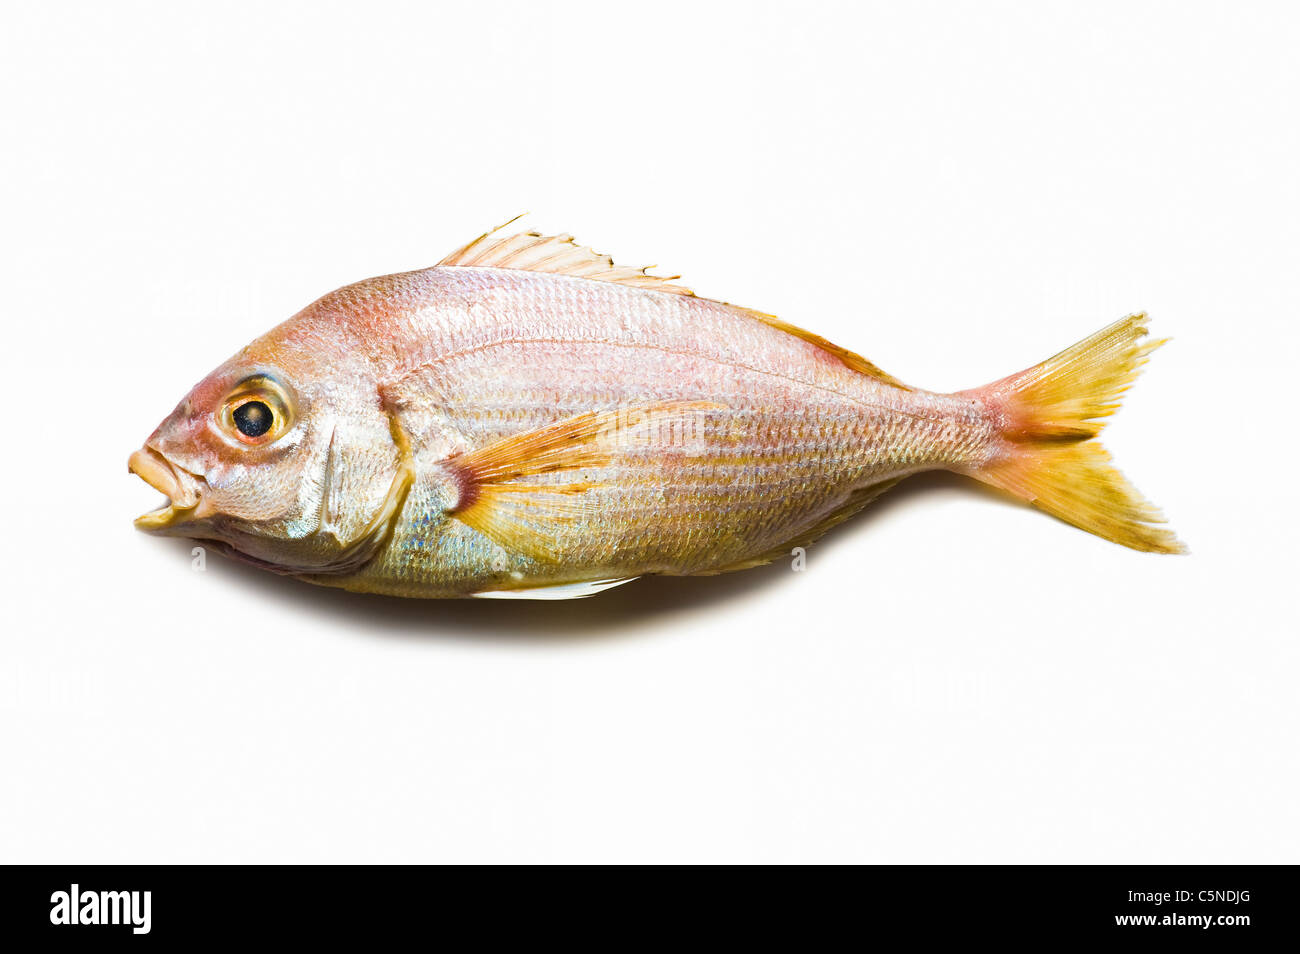 A red snapper on a white surface Stock Photo